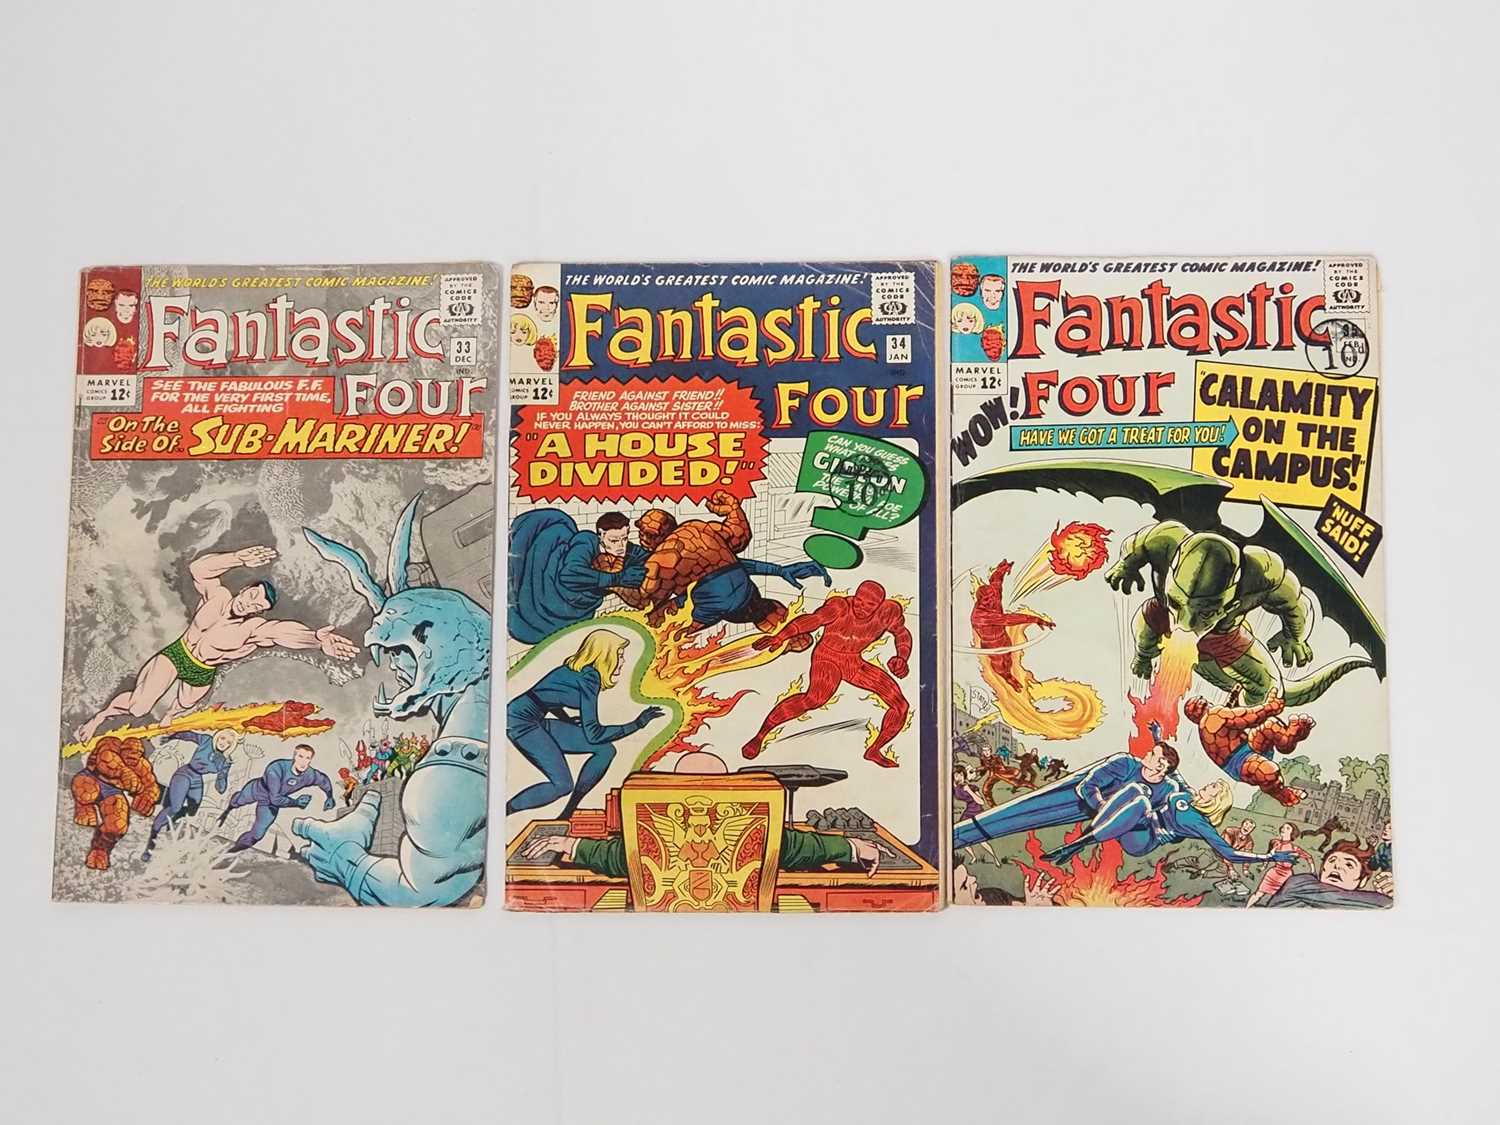 FANTASTIC FOUR #33, 34, 35 (3 in Lot) - (1964/1965 - MARVEL) - Includes the first appearances of